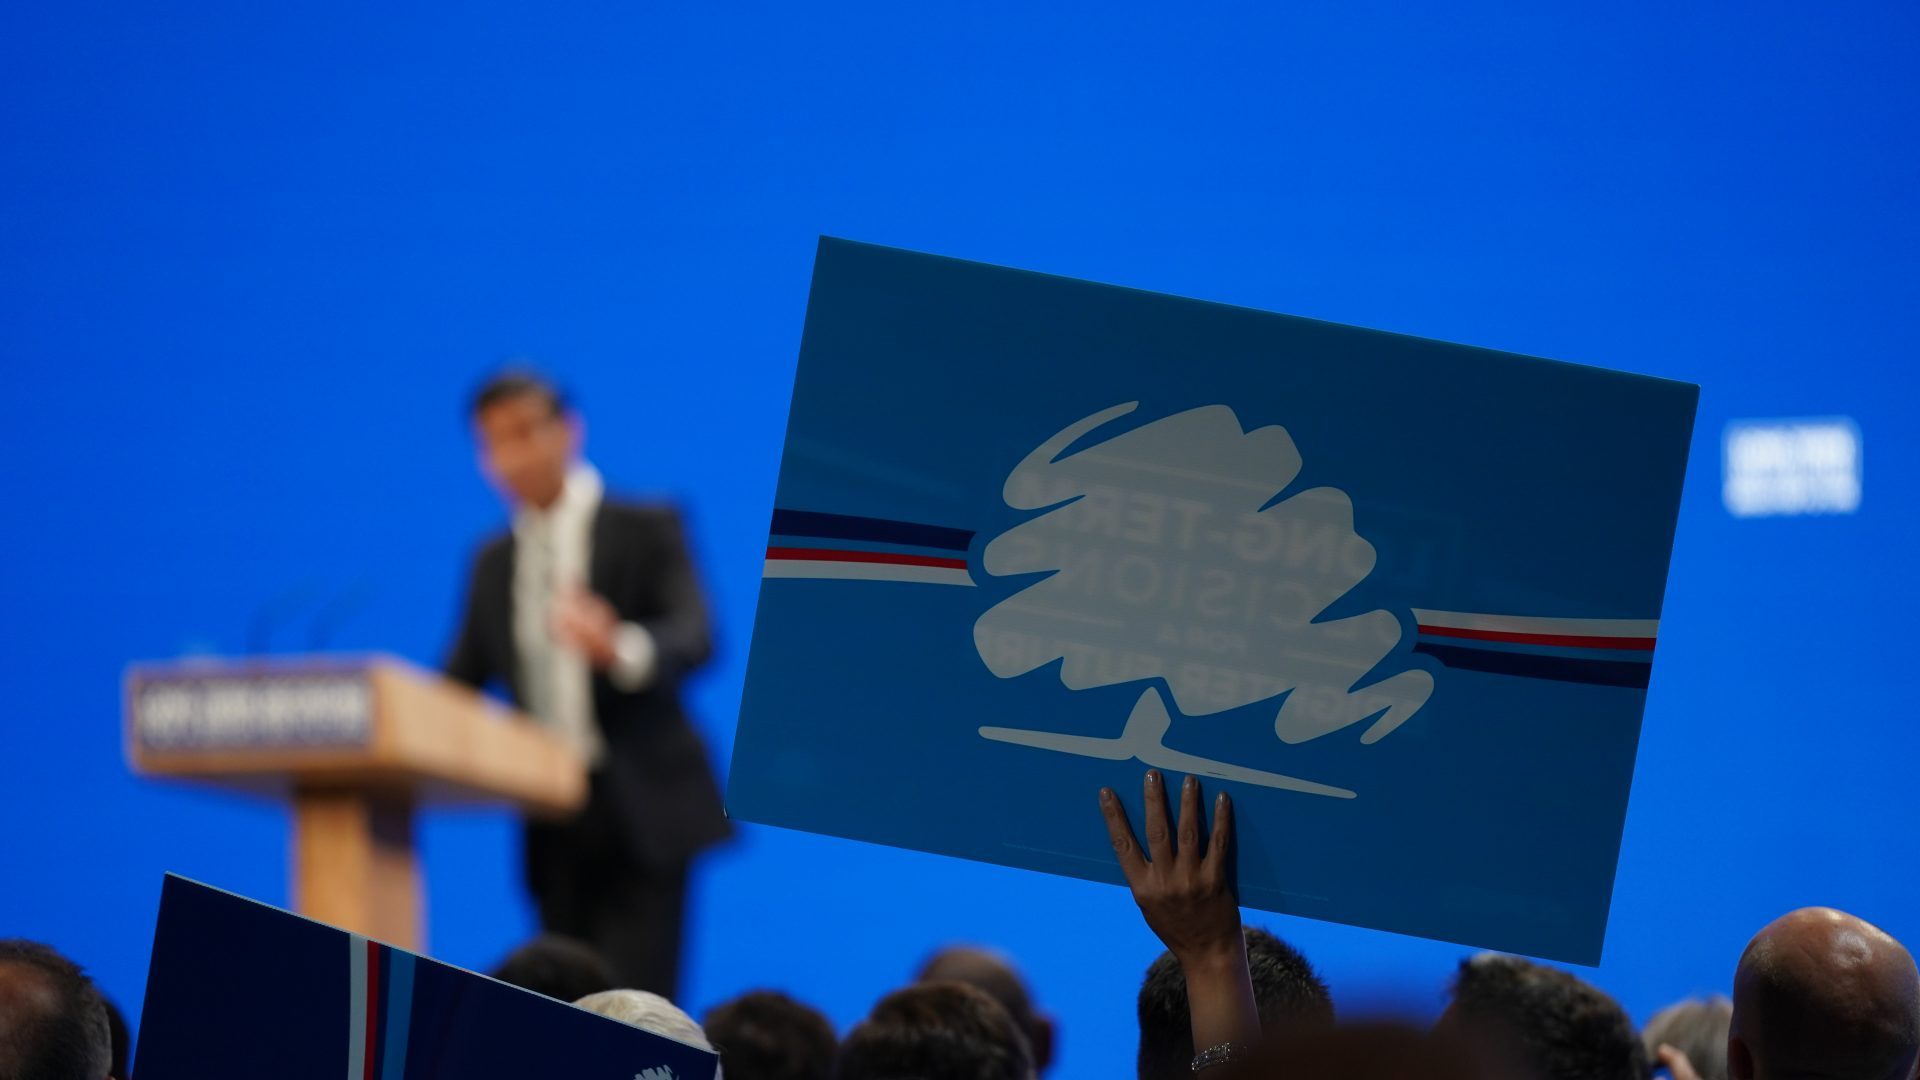 People hold up signs in support of the Conservative party during prime minister Rishi Sunak's speech. Photo: Ian Forsyth/Getty Images